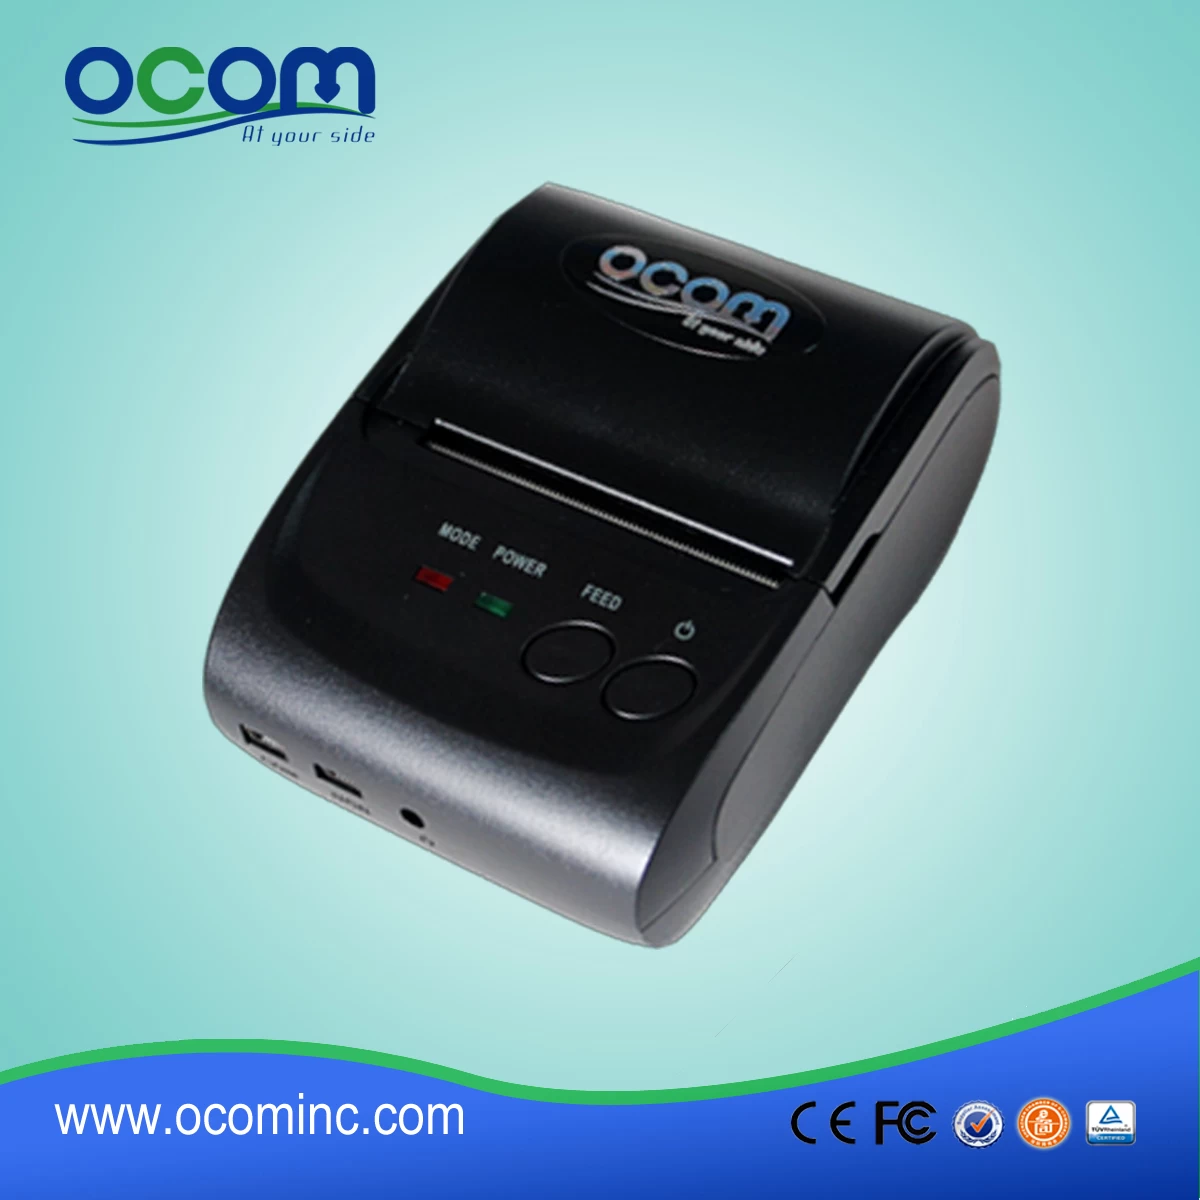 reliable wireless thermal printer machine, 58mm thermal receipt printer